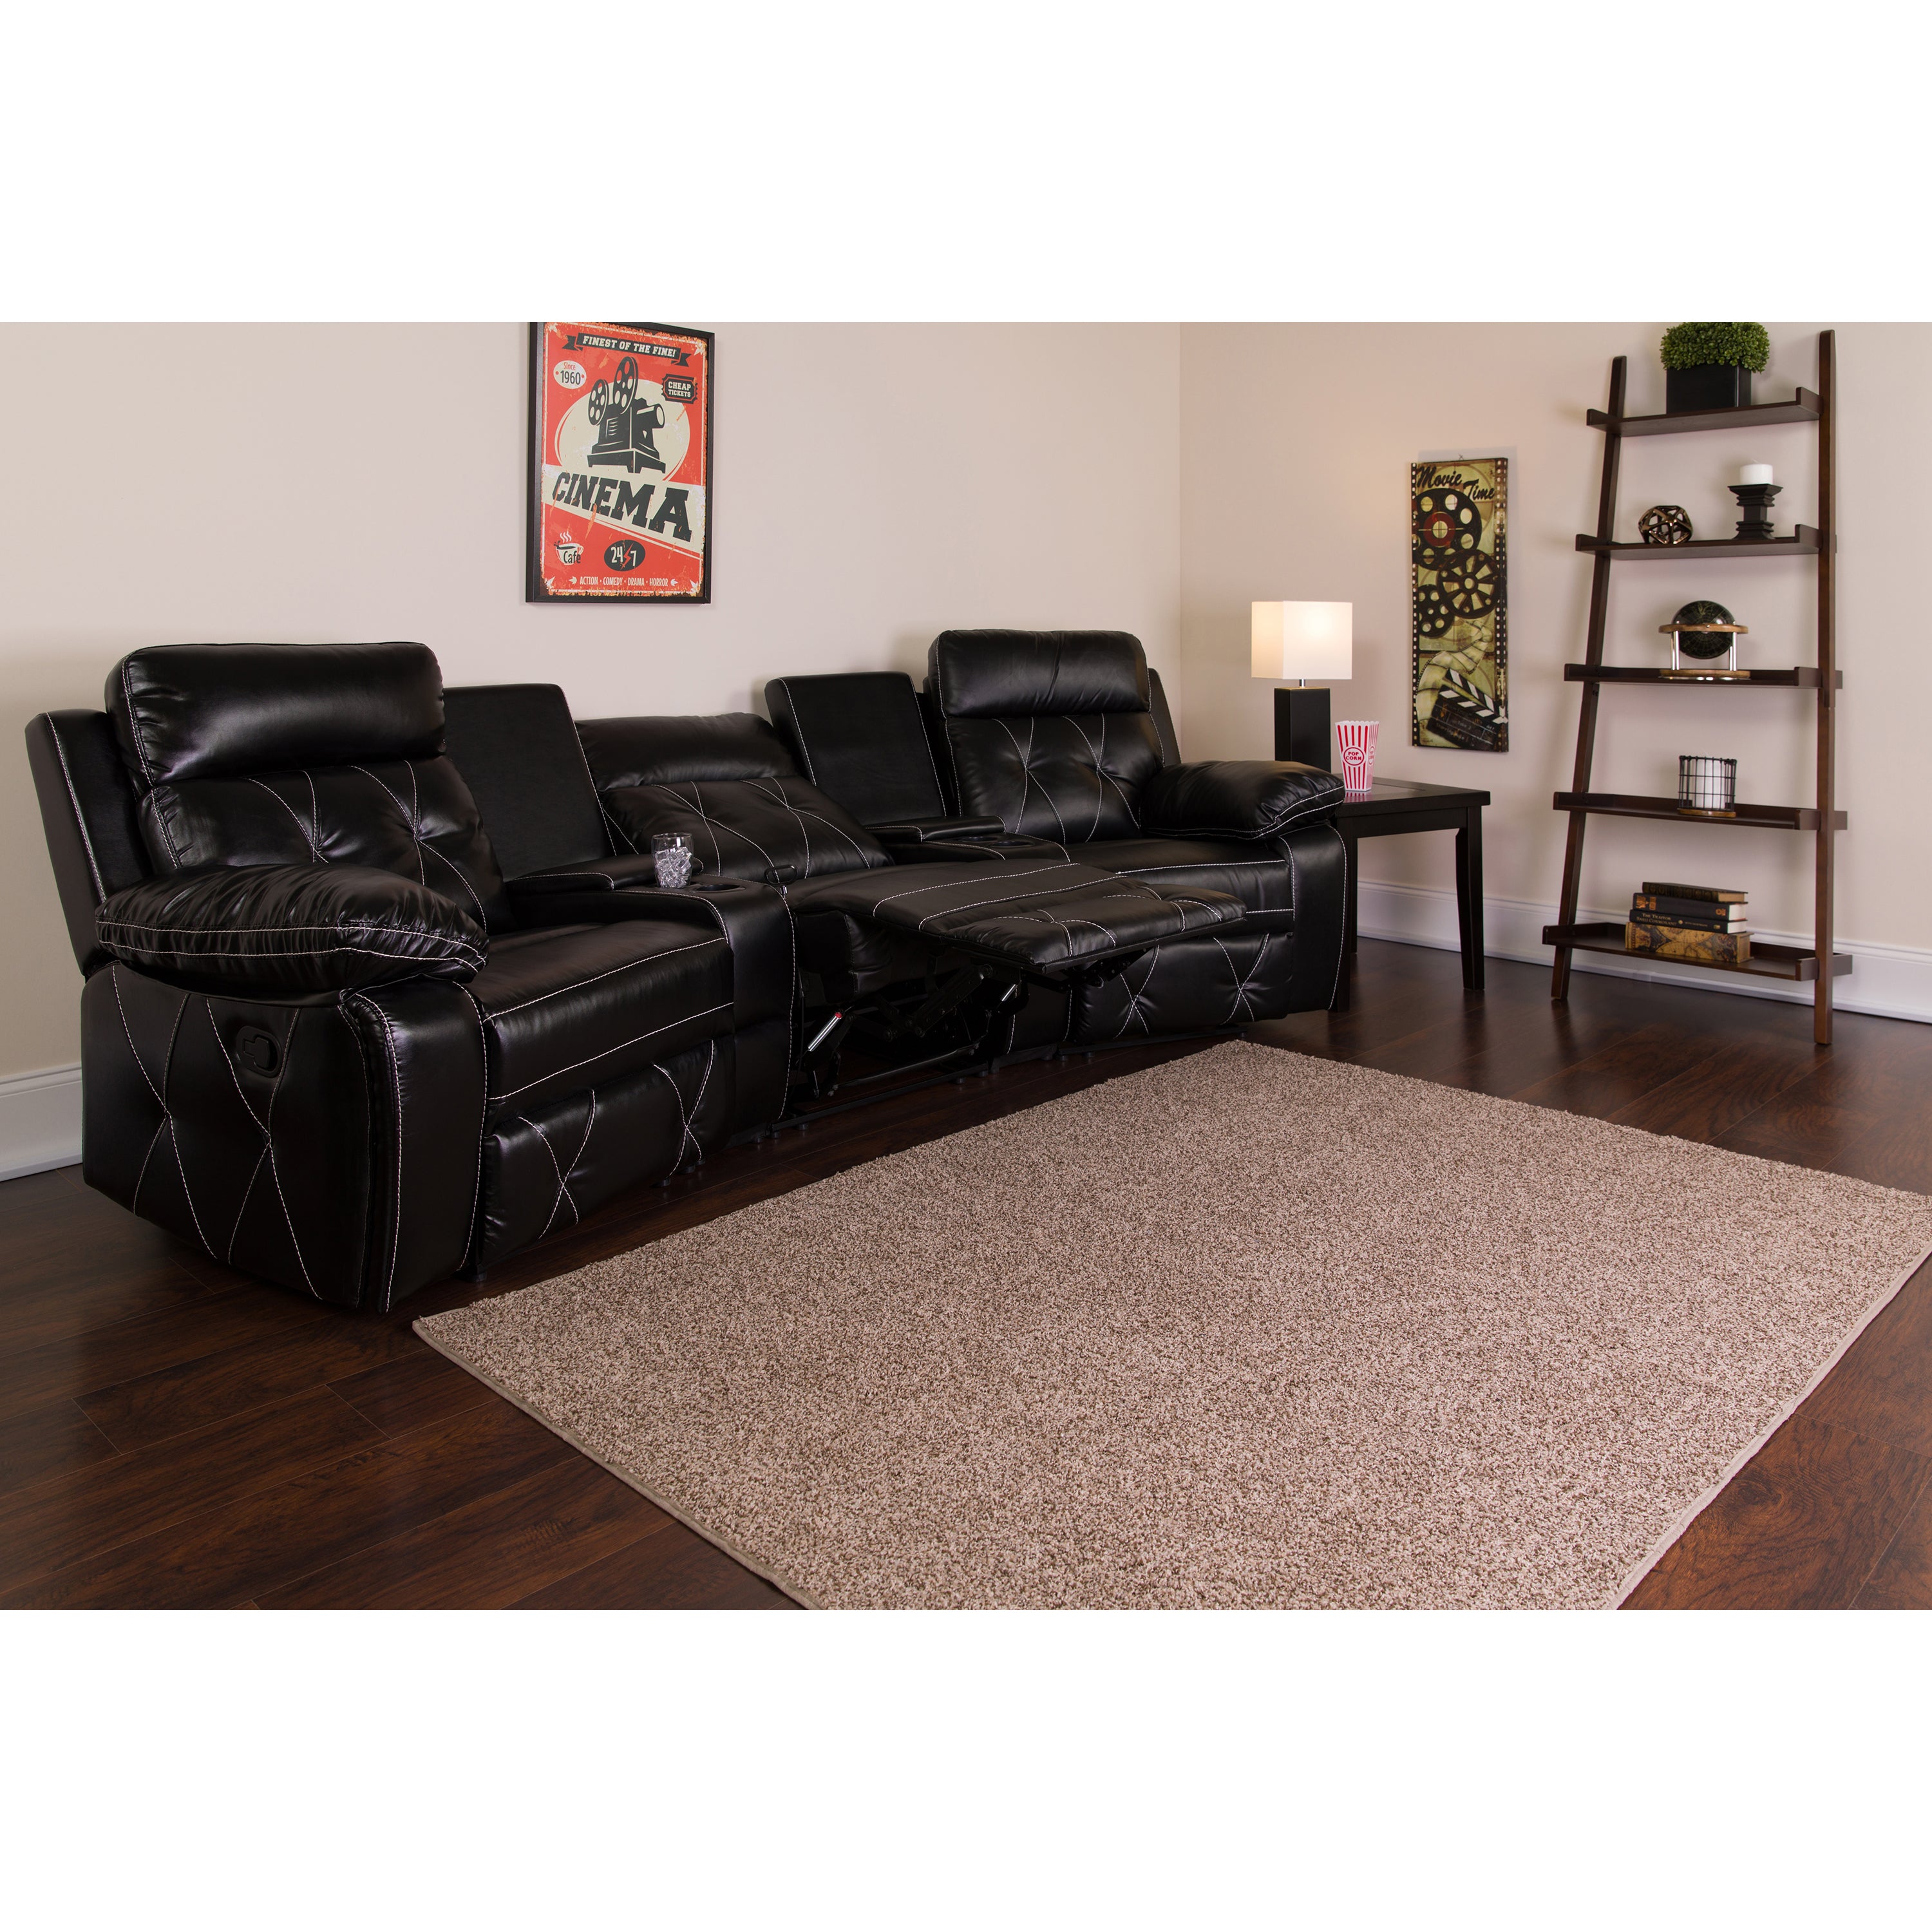 Reel Comfort Series 3-Seat Reclining LeatherSoft Theater Seating Unit with Curved Cup Holders-Theater Seating-Flash Furniture-Wall2Wall Furnishings